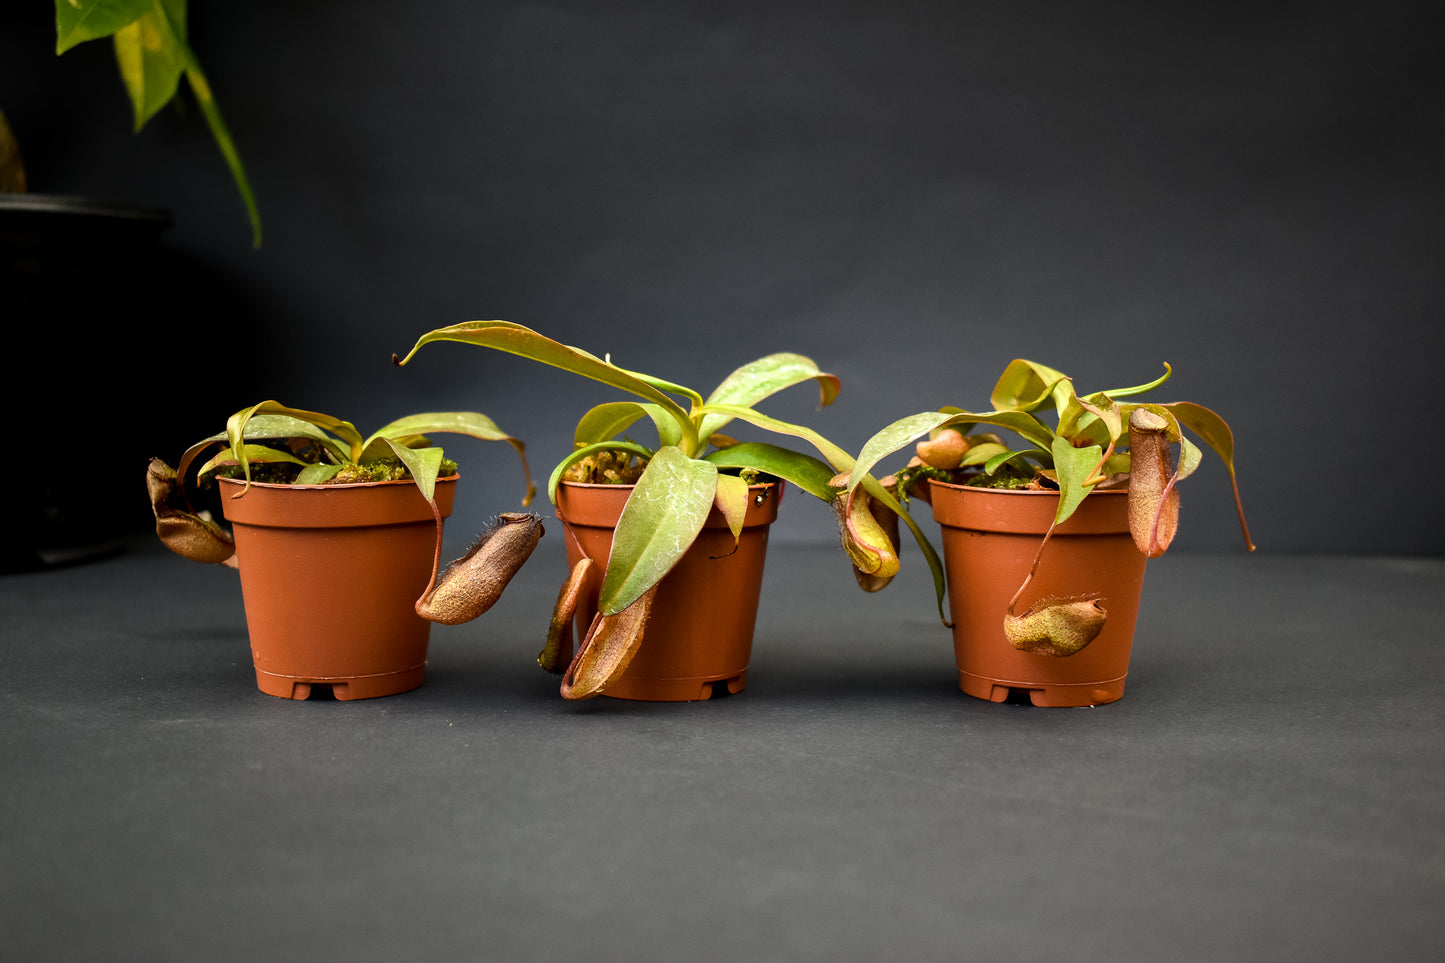 Mini plant box - " Thirsty Thursday" Pitcher Plants, Nepenthes Rebecca (3 plants) - Belle's Greenhouse